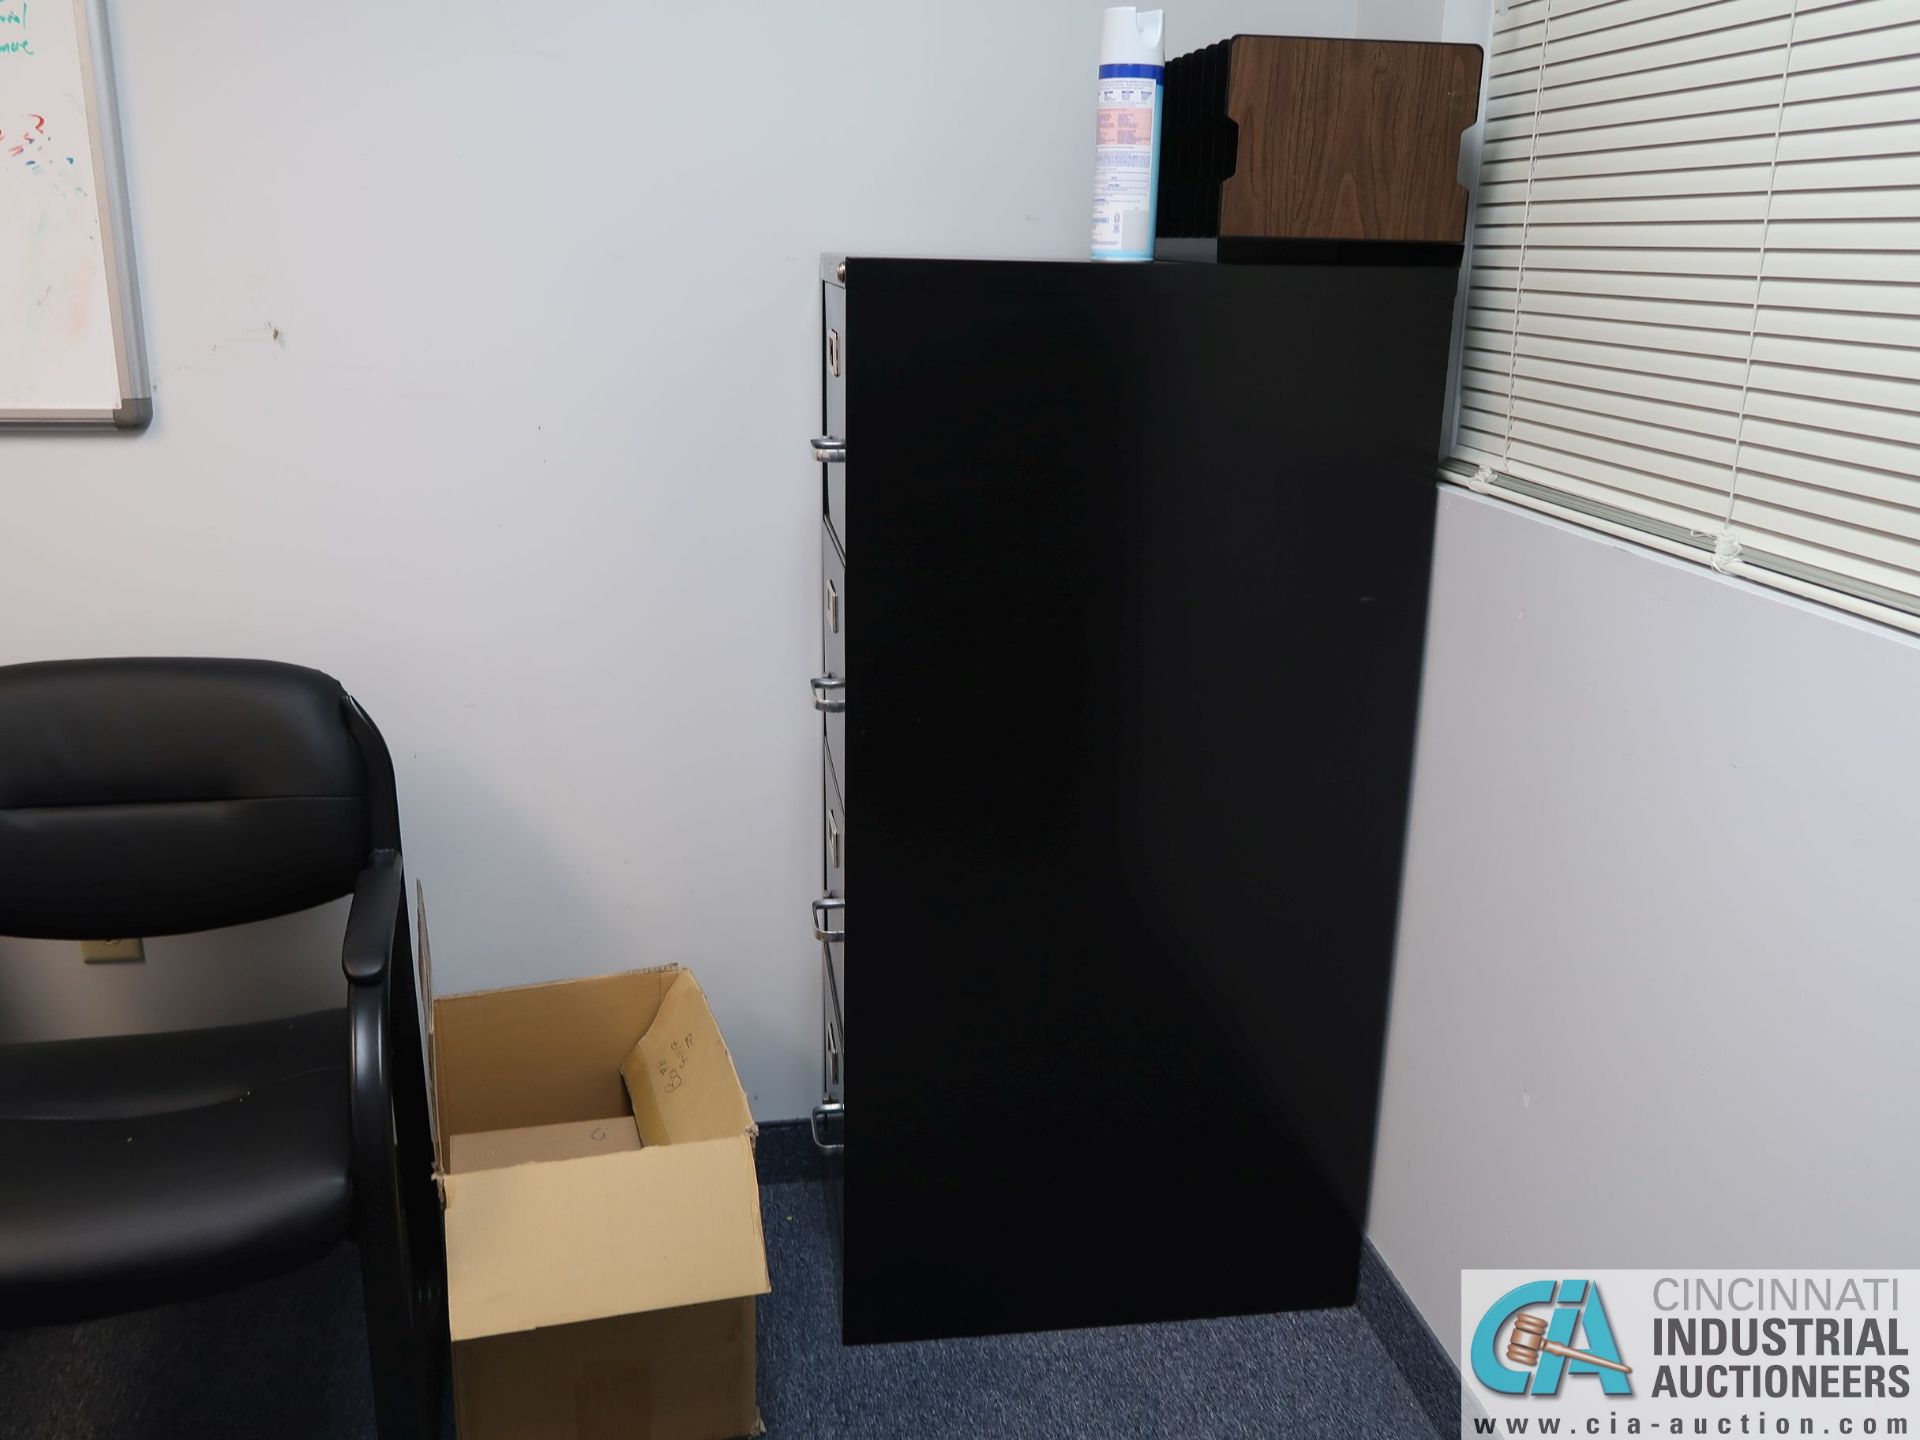 (LOT) L-SHAPED MODULAR DESK DESK WITH FILE CABINETS WITH CHAIRS ** NO DRY ERASE BOARD ** - Image 3 of 5